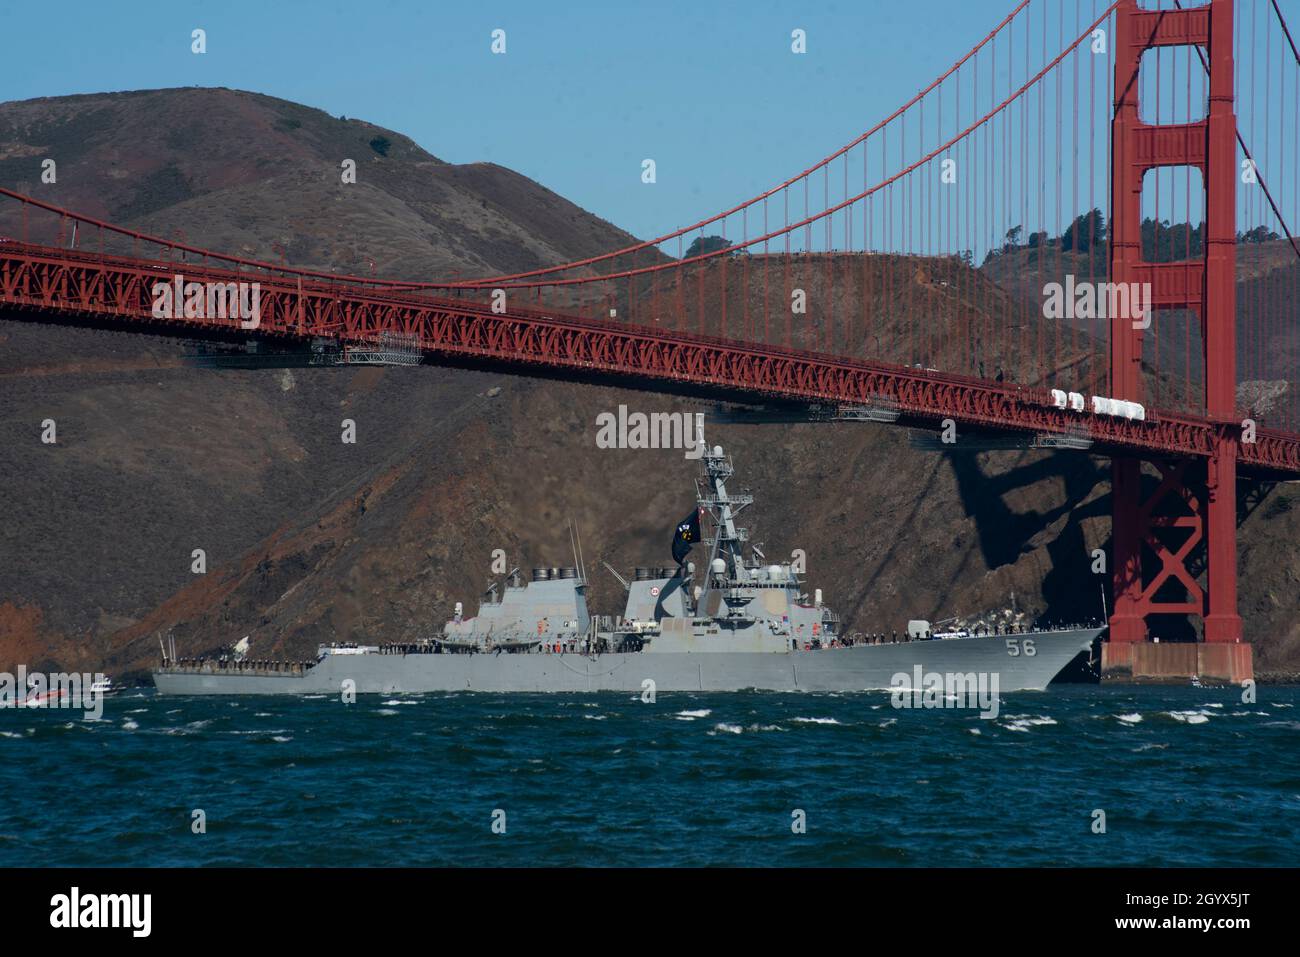 211008-N-WY048-1019  SAN FRANCISCO (Oct. 8, 2021) The Arleigh Burke-class guided-missile destroyer USS Shoup (DDG 86) transits under the Golden Gate Bridge during San Francisco Fleet Week (SFFW) 2021. SFFW is an opportunity for the American public to meet their Navy, Marine Corps and Coast Guard teams and experience America's sea services. During fleet week, service members participate in various community service events, showcase capabilities and equipment to the community, and enjoy the hospitality of the city and its surrounding areas. (U.S. Navy photo by Mass Communication Specialist 2nd C Stock Photo